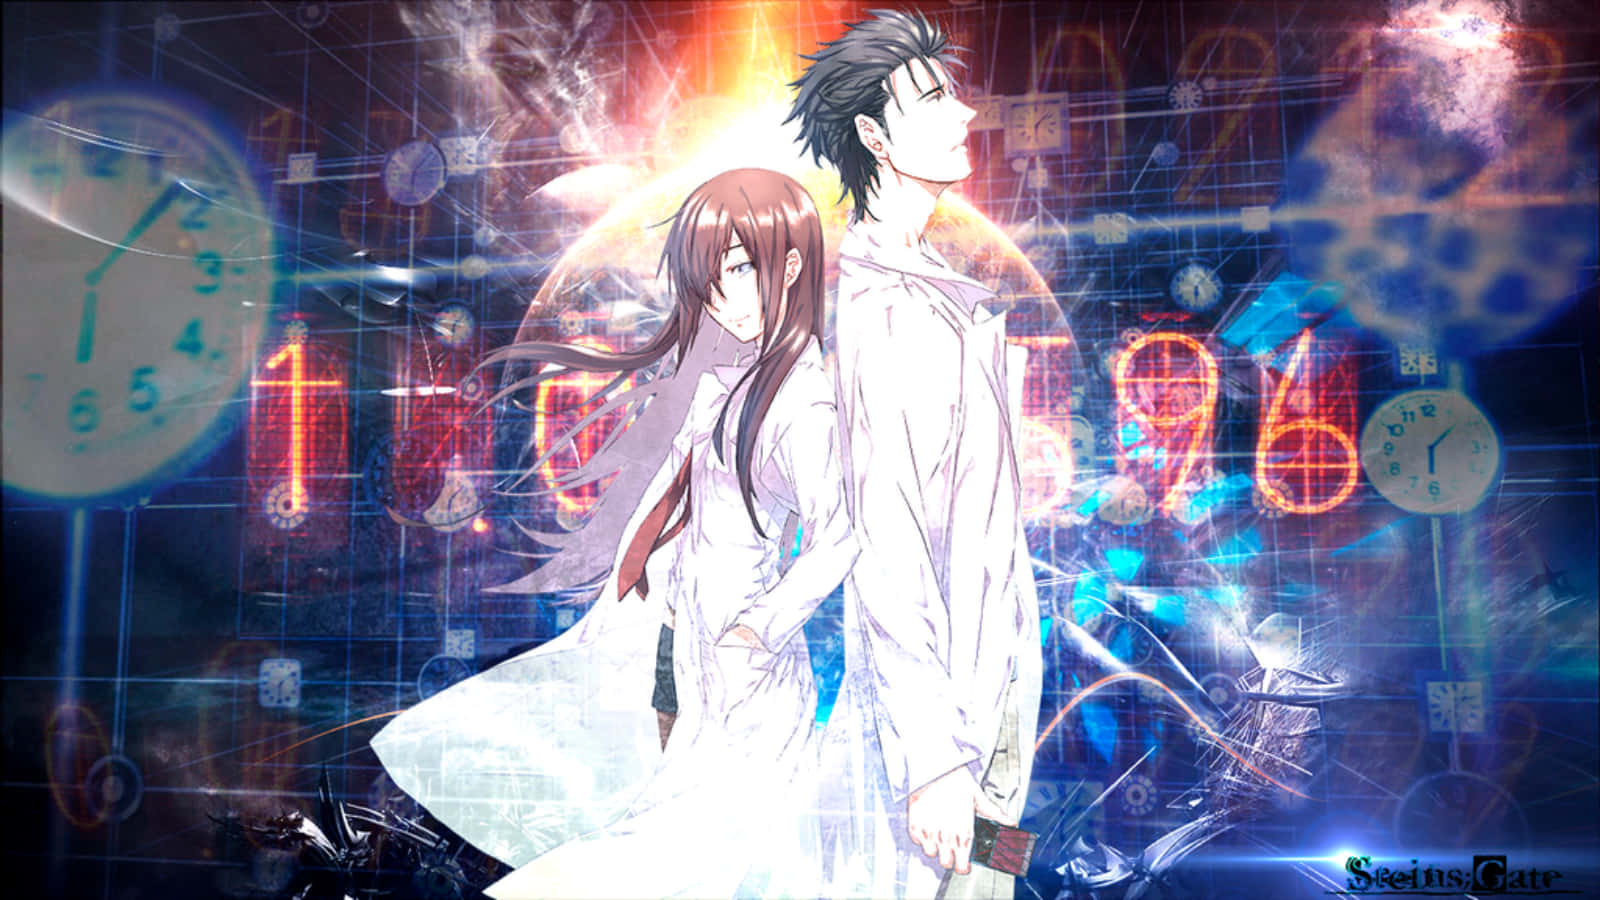 1.  Unlock the mysteries within Steins Gate